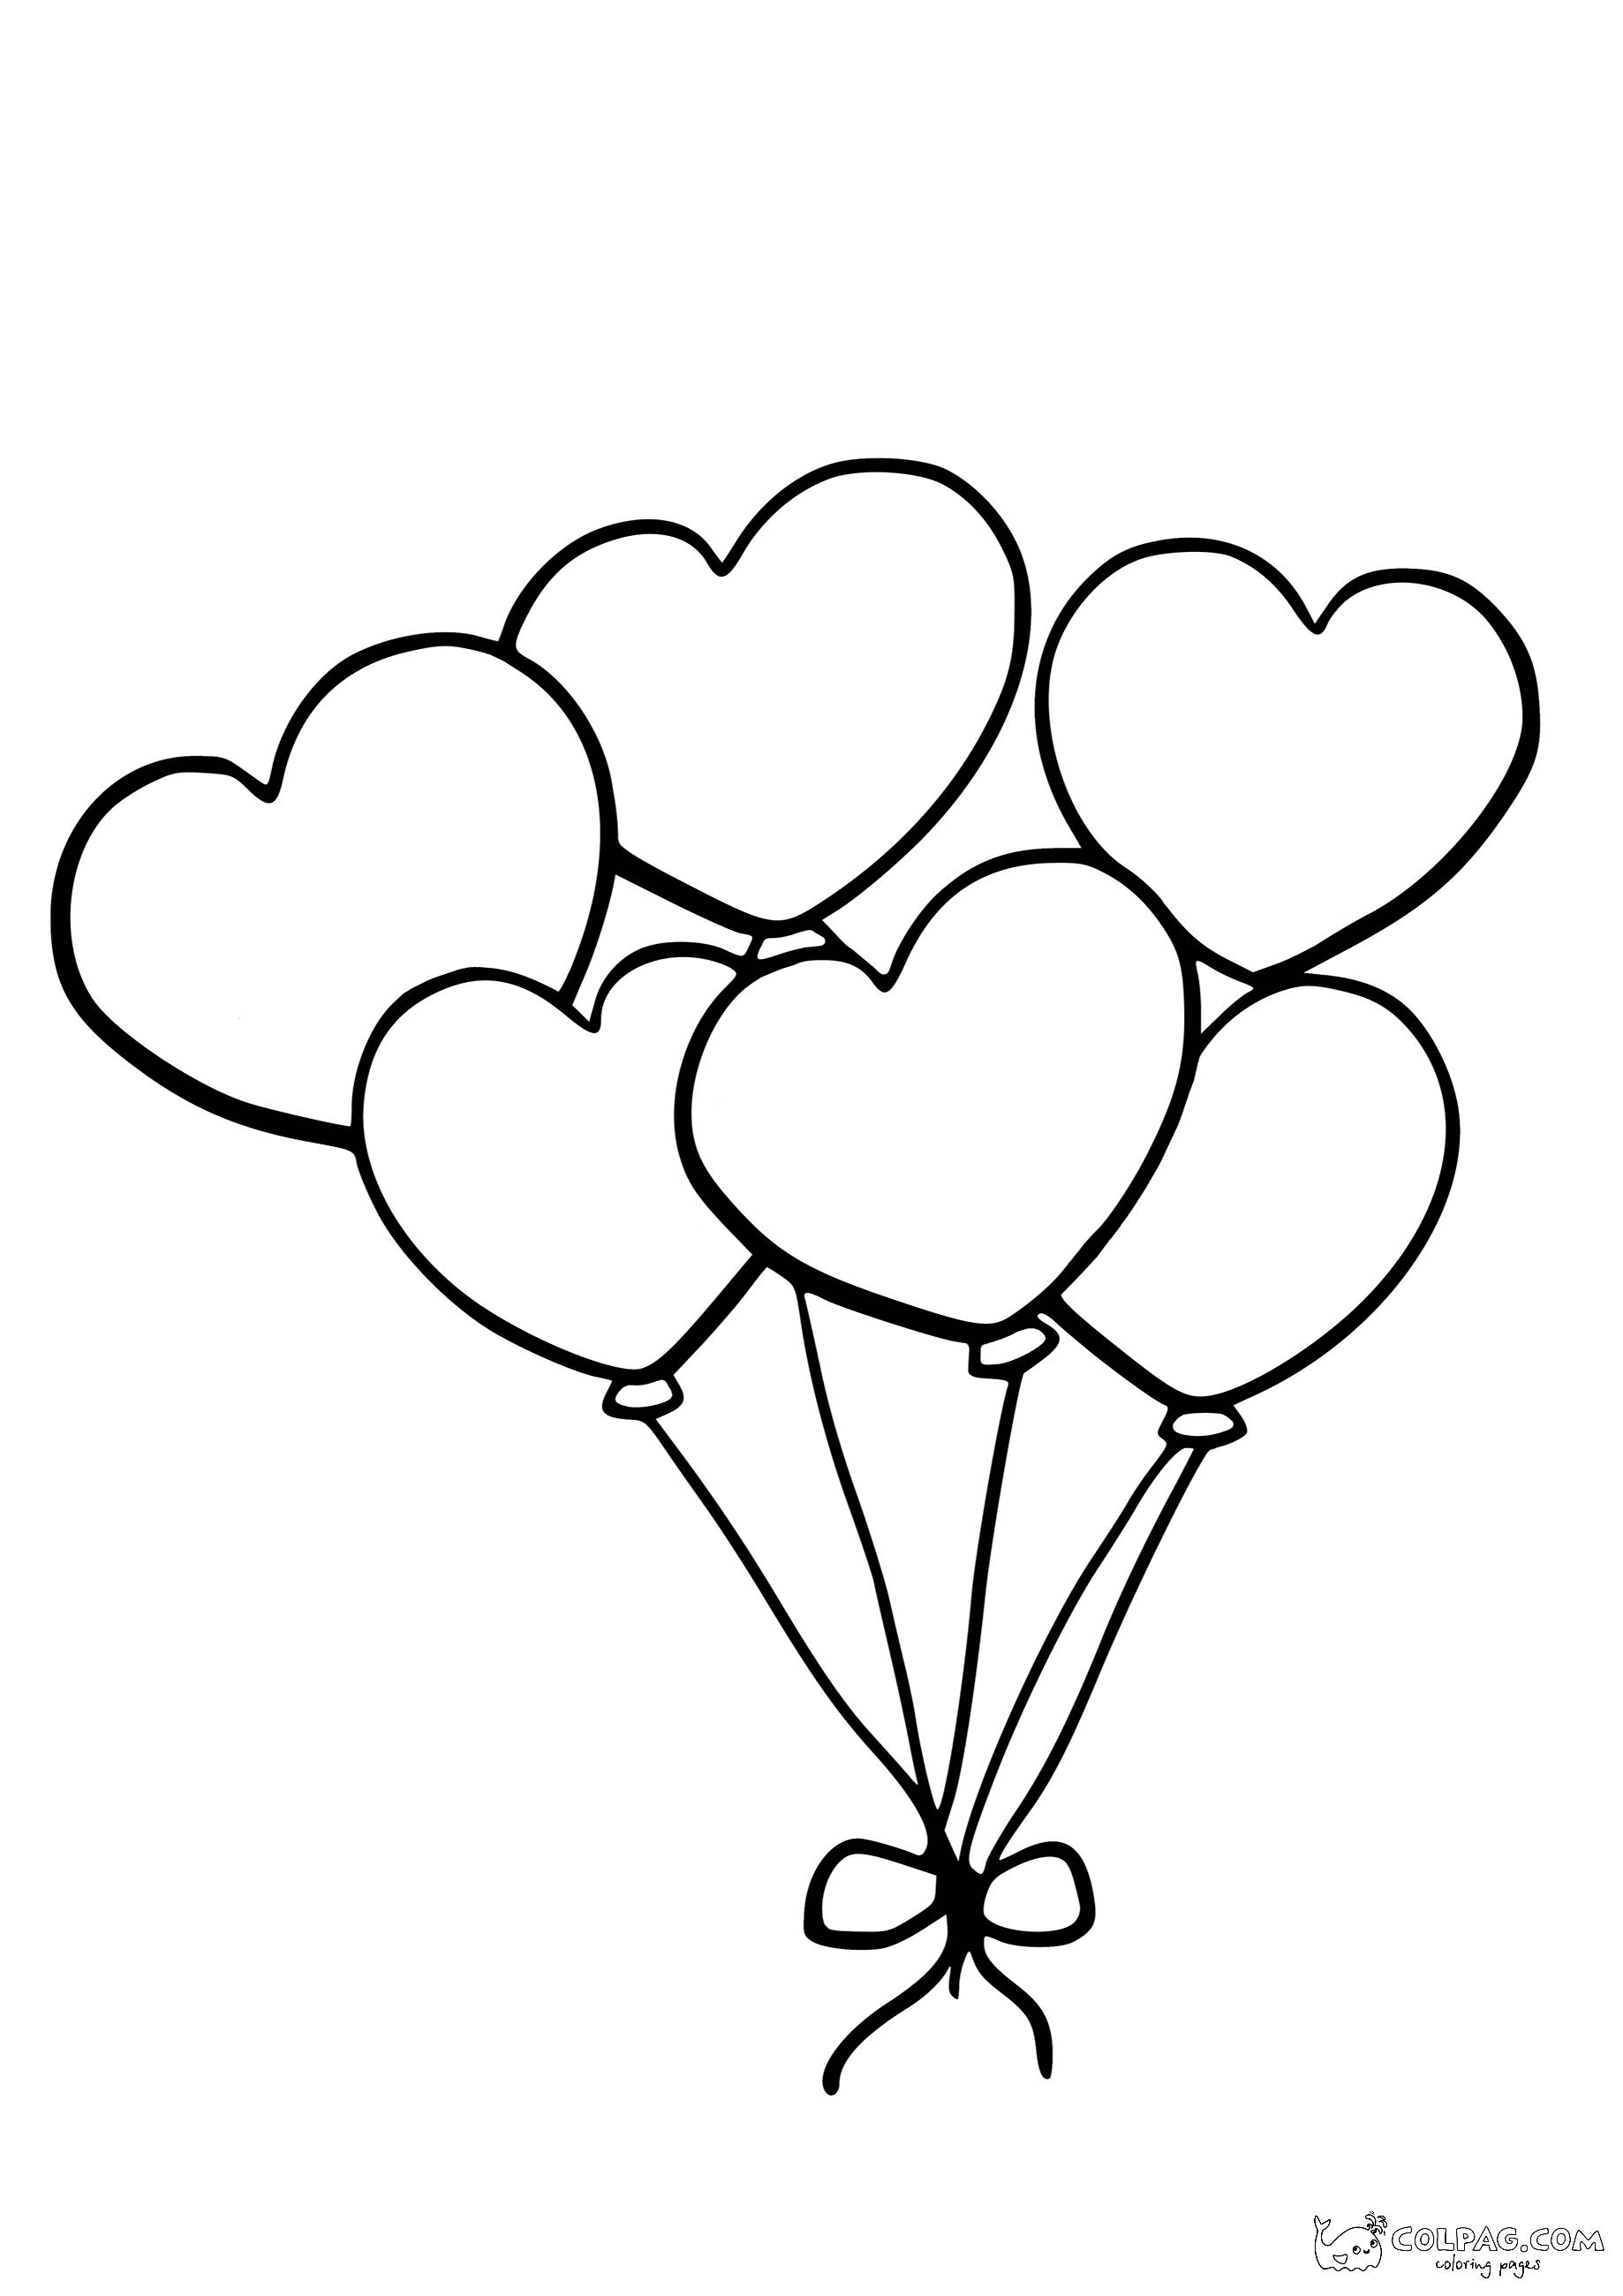 10-hearts-but-baloons-coloring-page-colpag-10